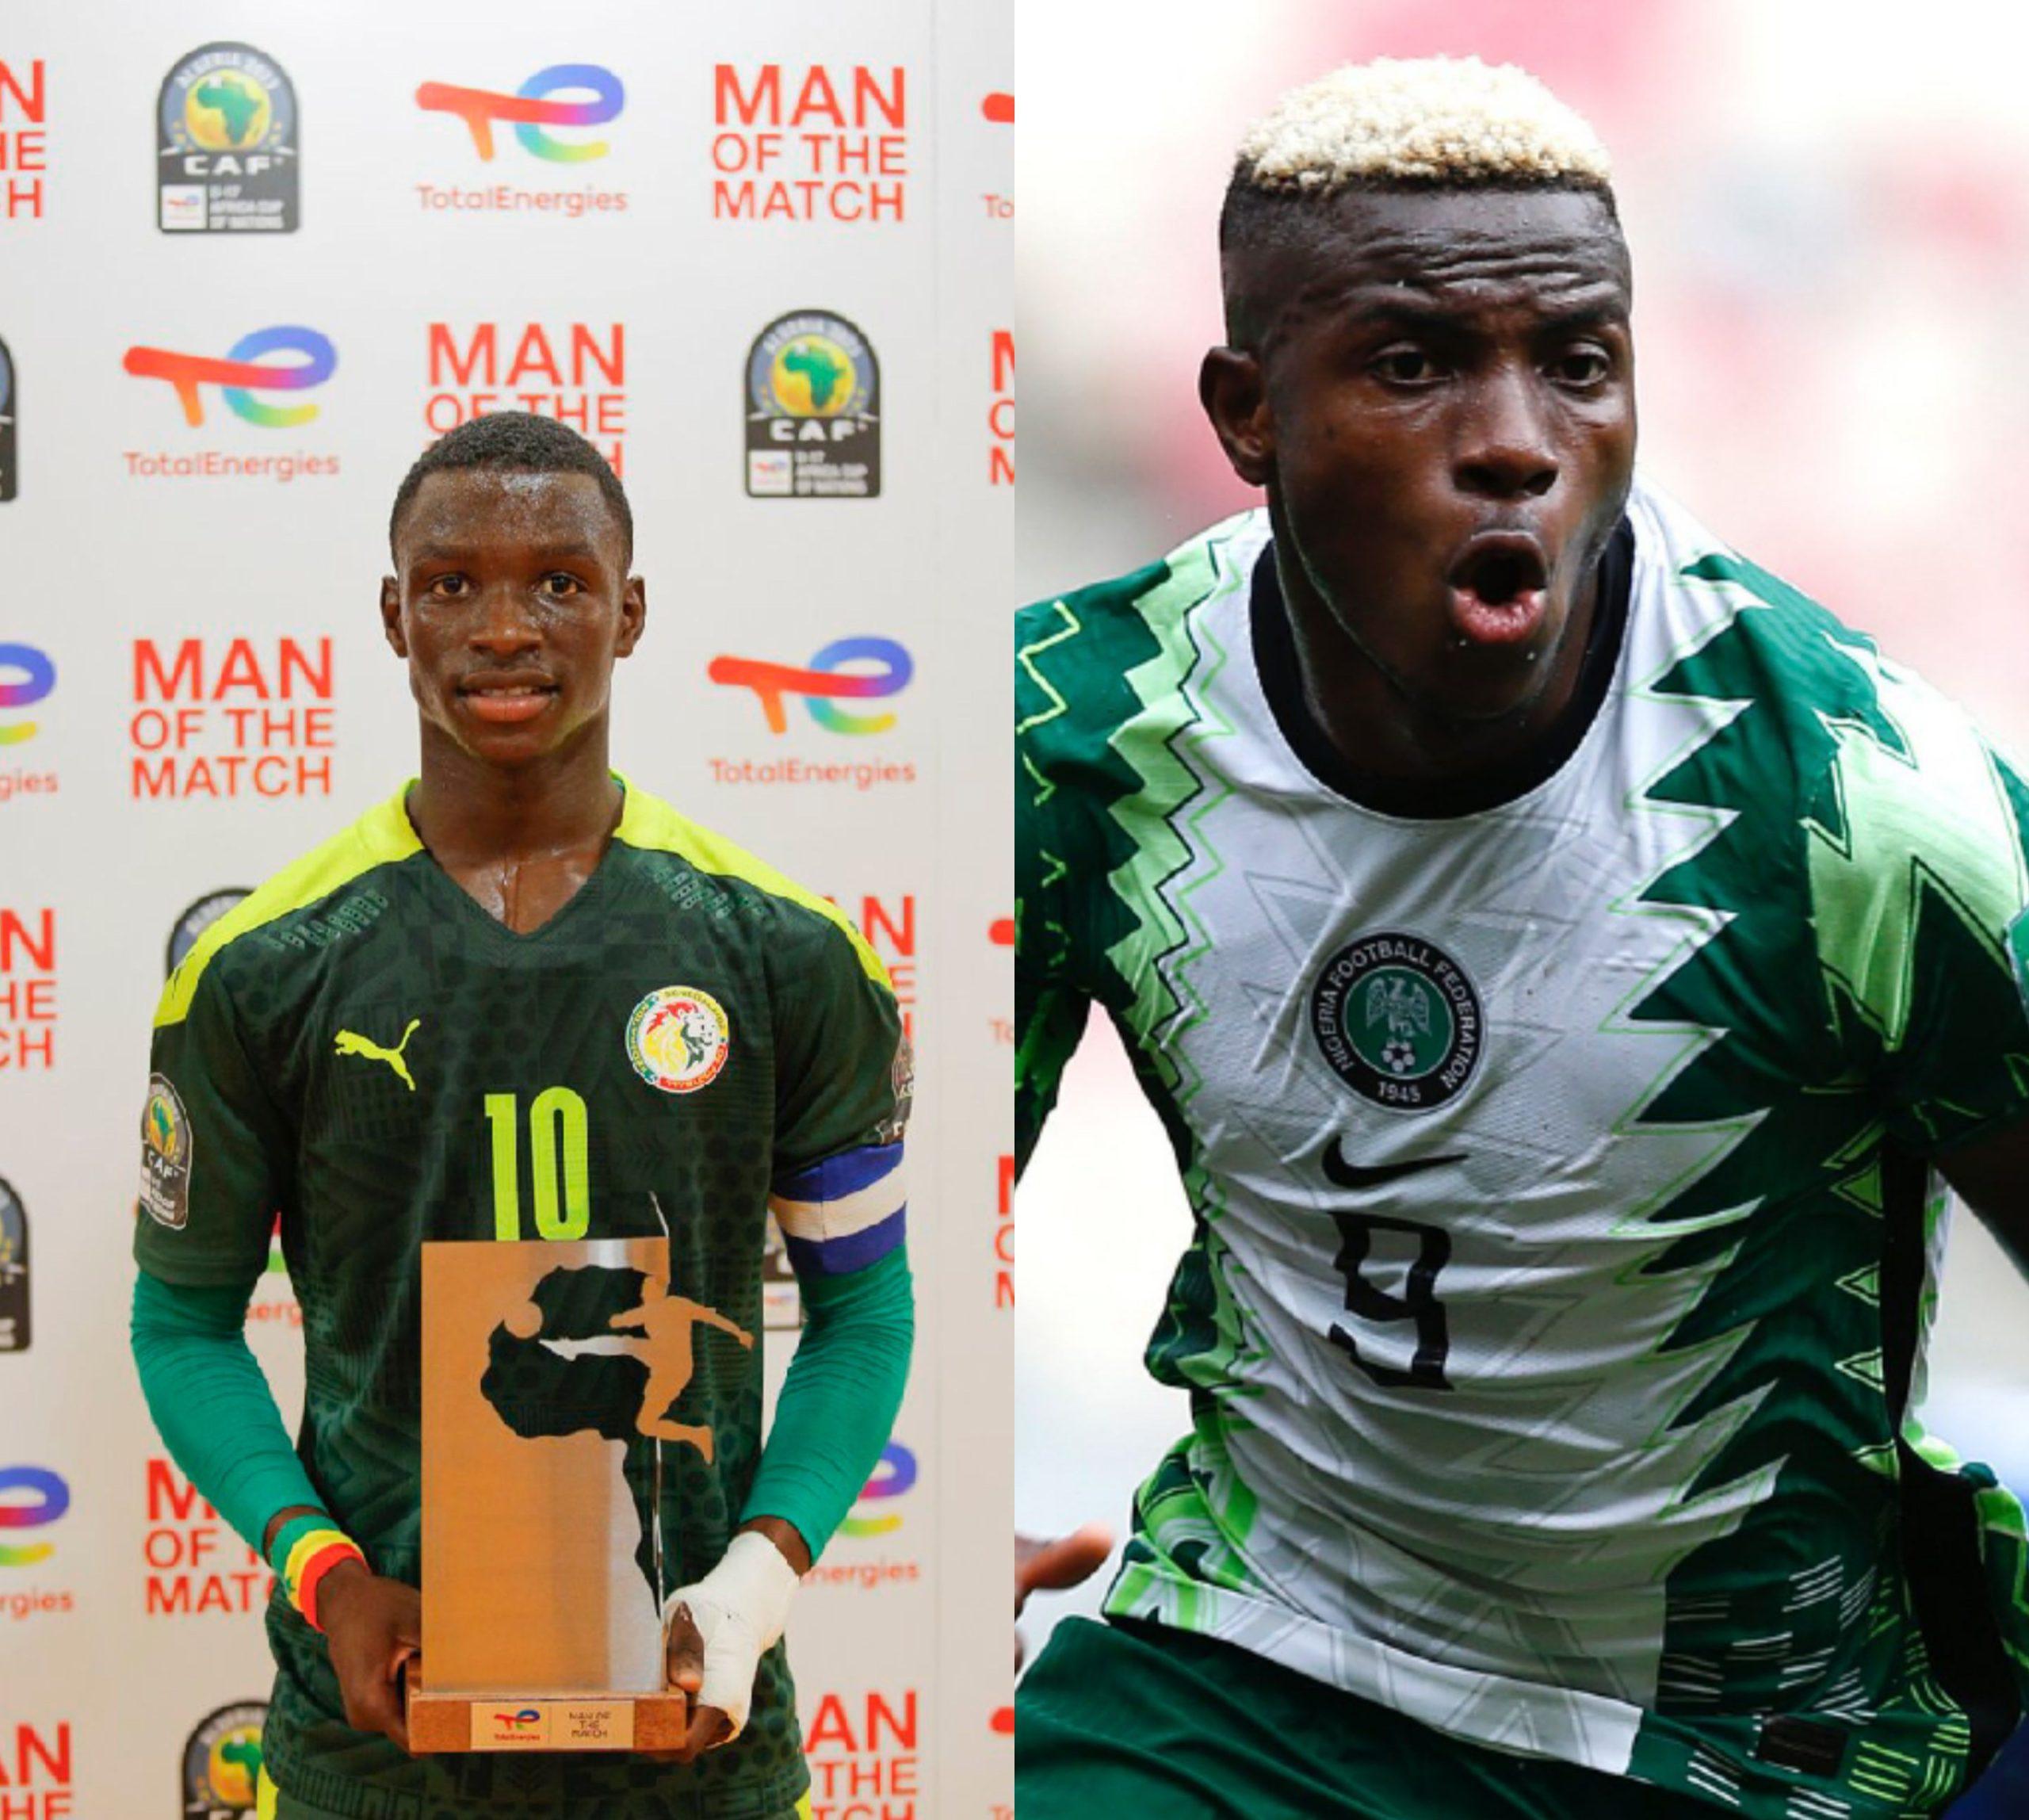 U-17 AFCON: Senegalese high scorer snubs Liverpool hero Mane, goals to be like Napoli star Osimhen